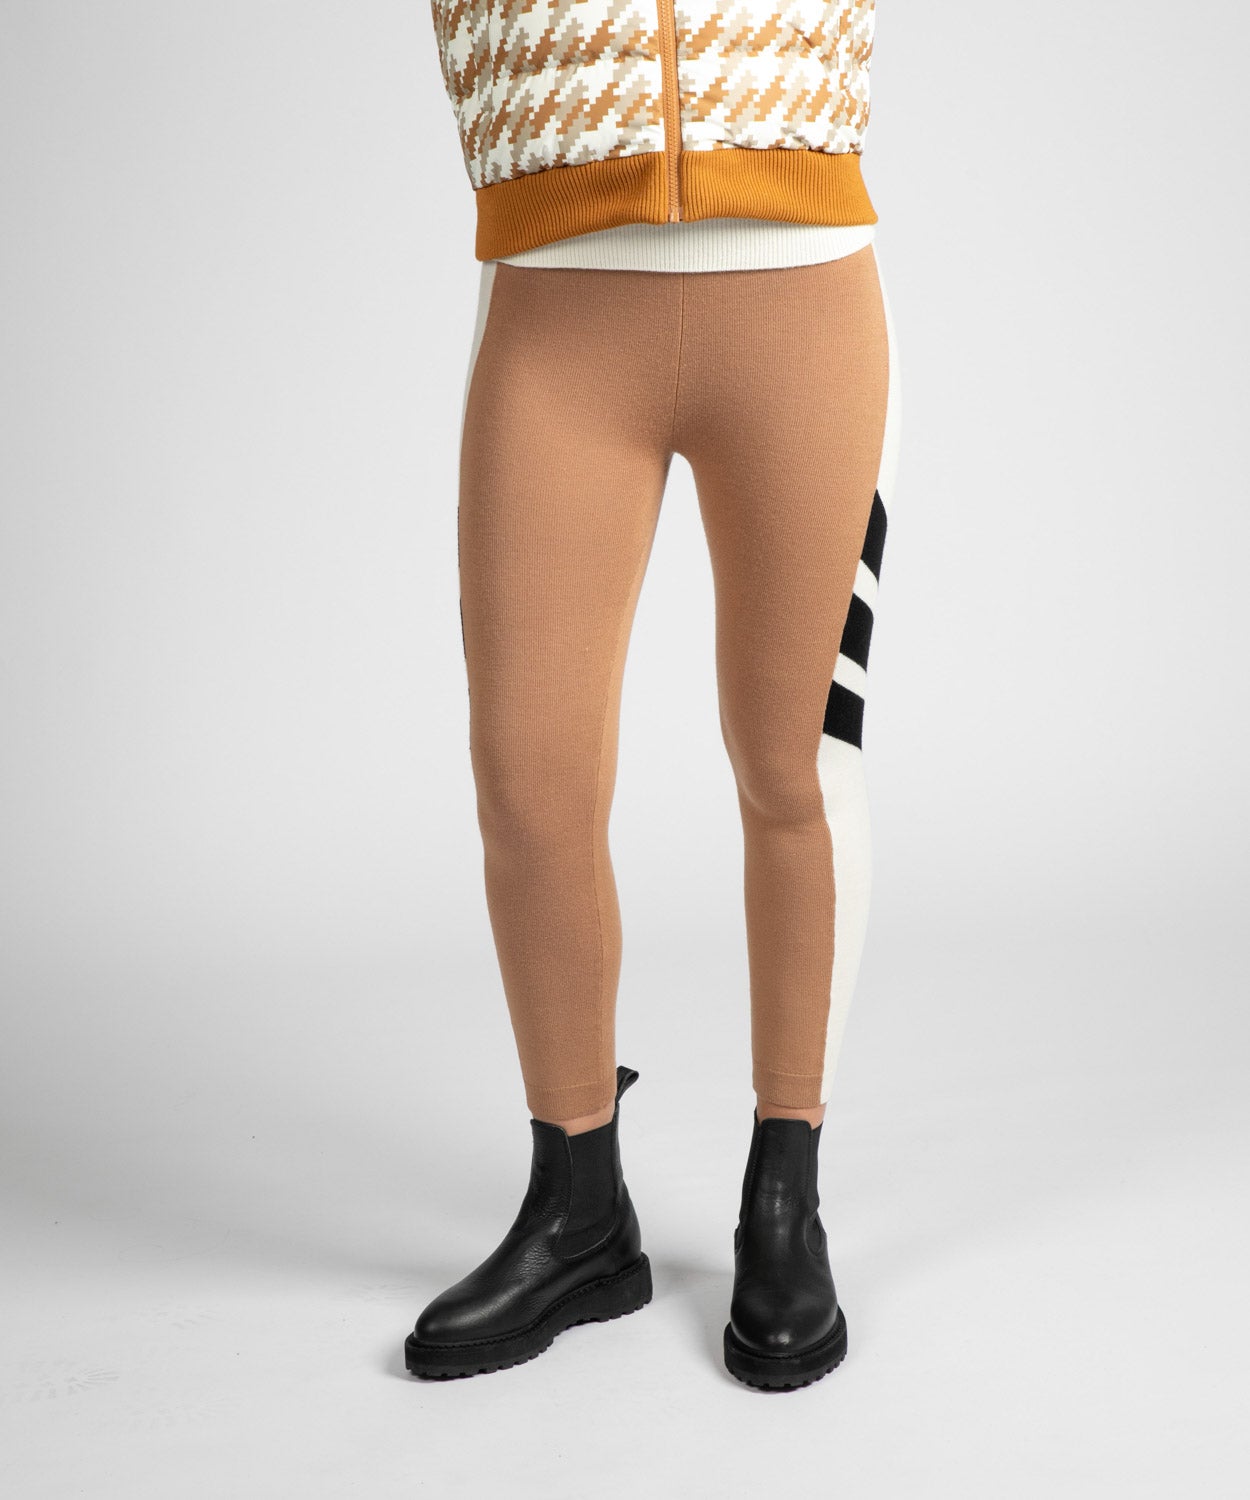 Women's Mania Bottom Base Layers | Thermals Perfect Moment Brown Sugar XS 